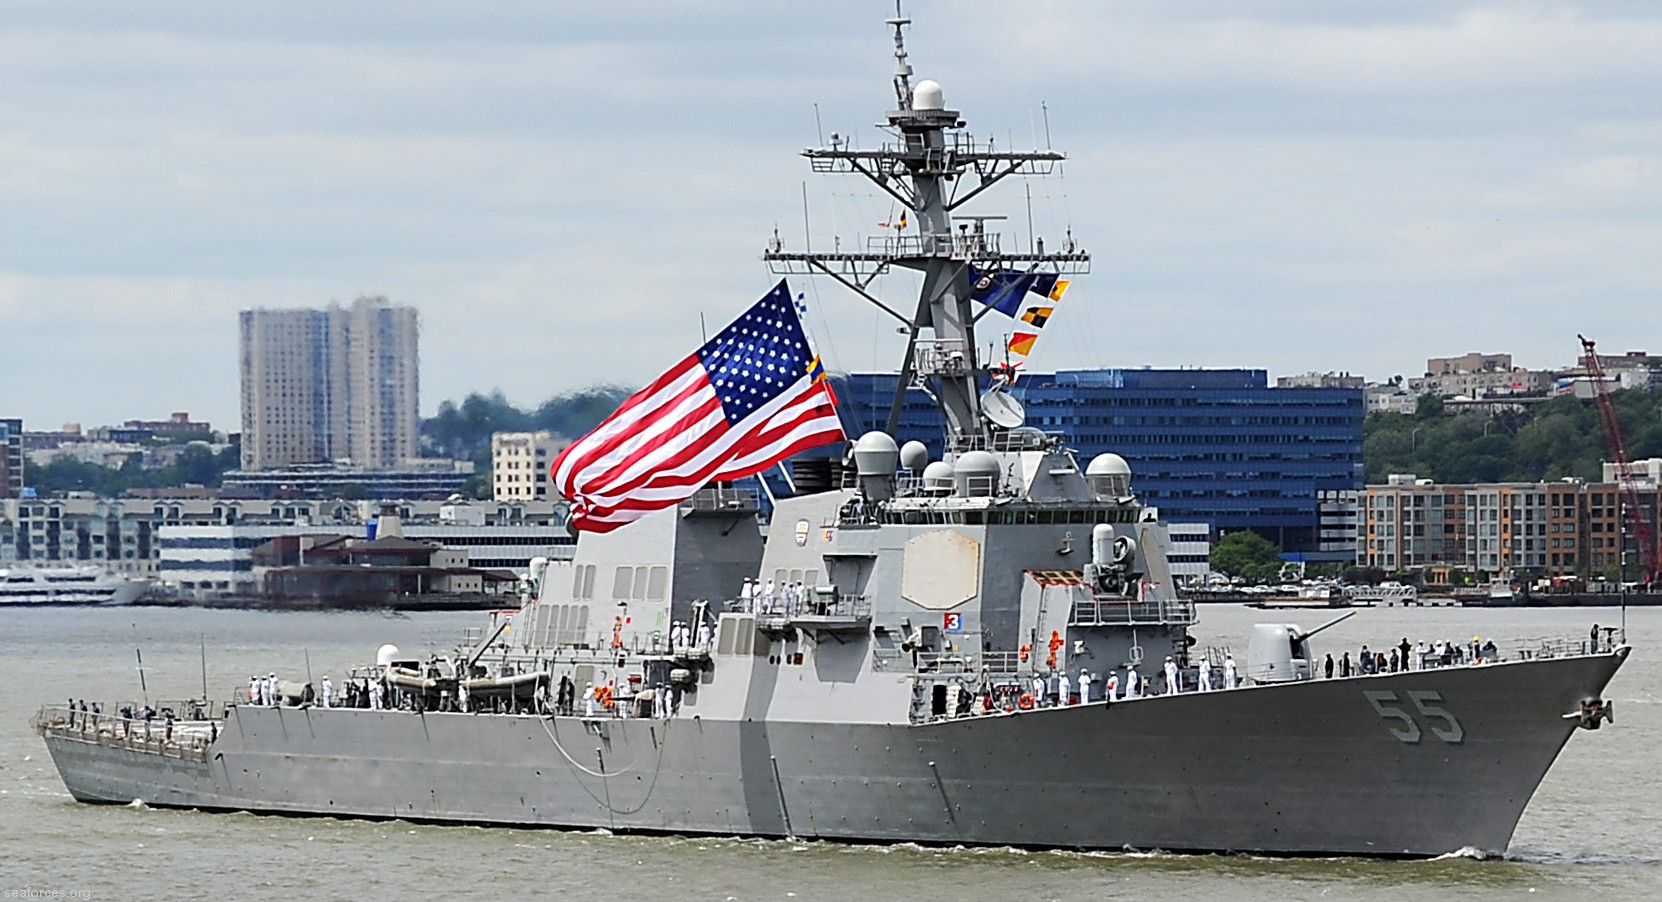 ddg-55 uss stout guided missile destroyer us navy 22